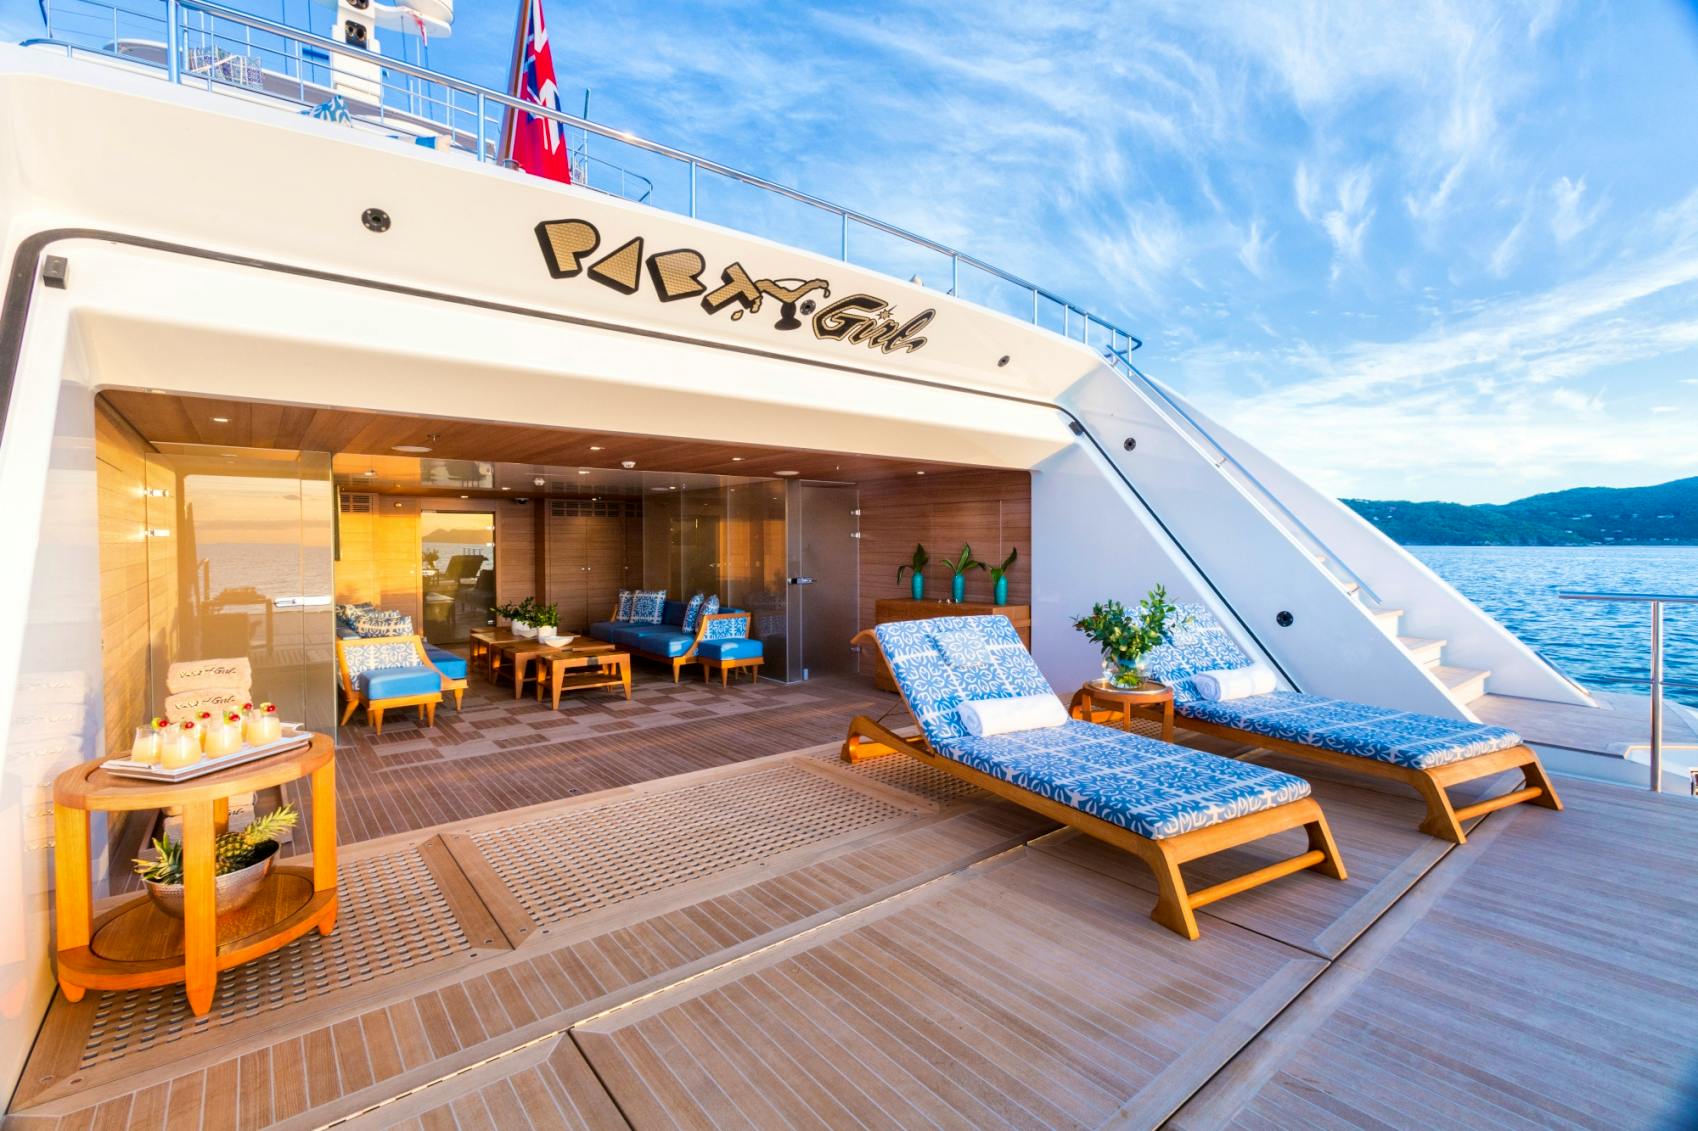 Features for PARTY GIRL Private Luxury Yacht For charter